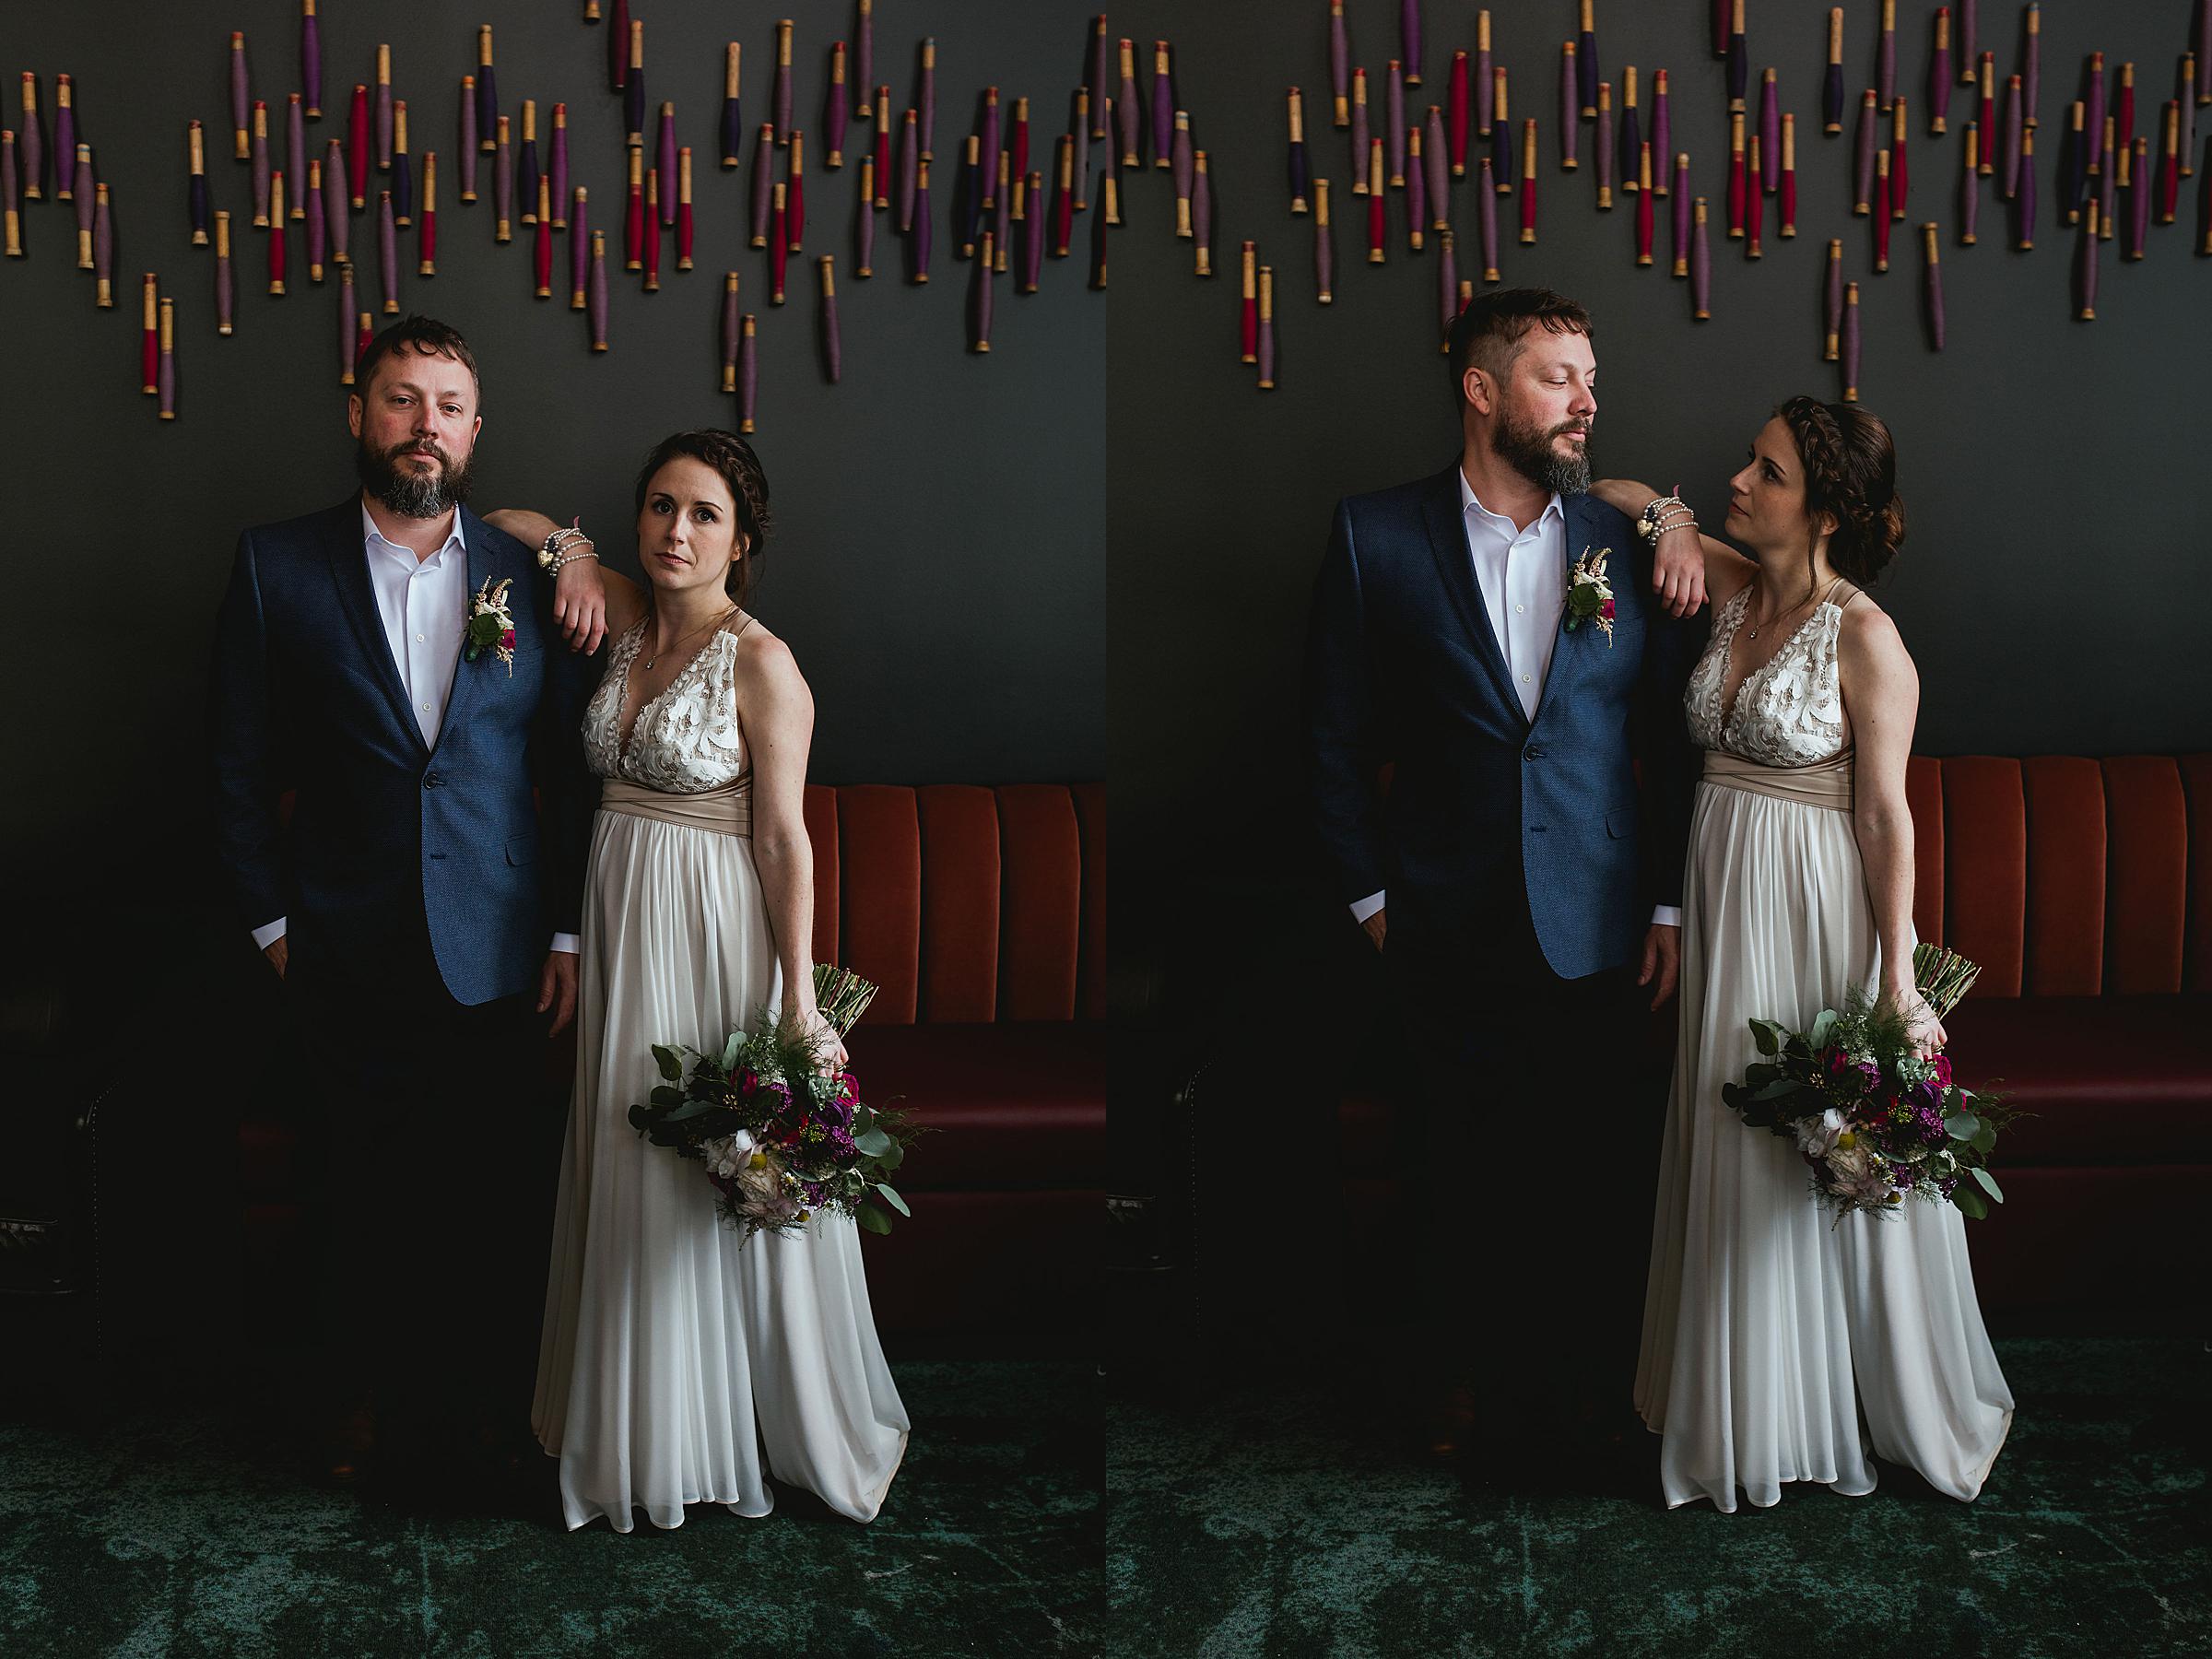 Omaha Wedding; Bridal & Groom Portraits at Hotel Deco; Florals by One & Only; Photographed by Juliana Montane Photography